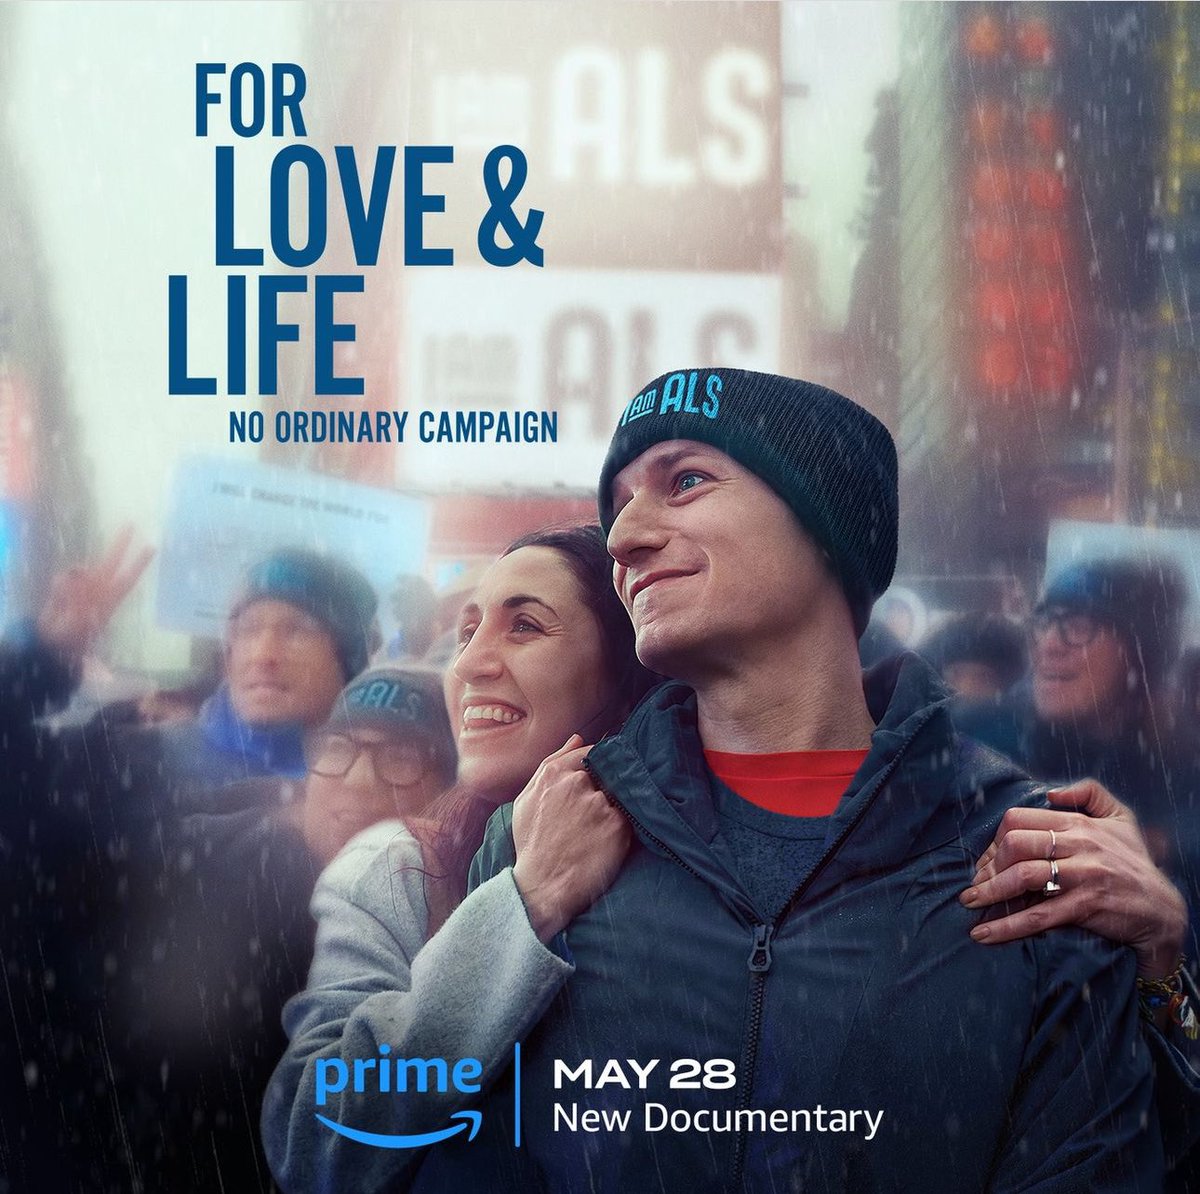 In just two days For Love and Life : No Ordinary Campaign will be streaming on @PrimeVideo. I cannot wait for you all to see this love story that has inspired people across the country to believe that they too can change the world.